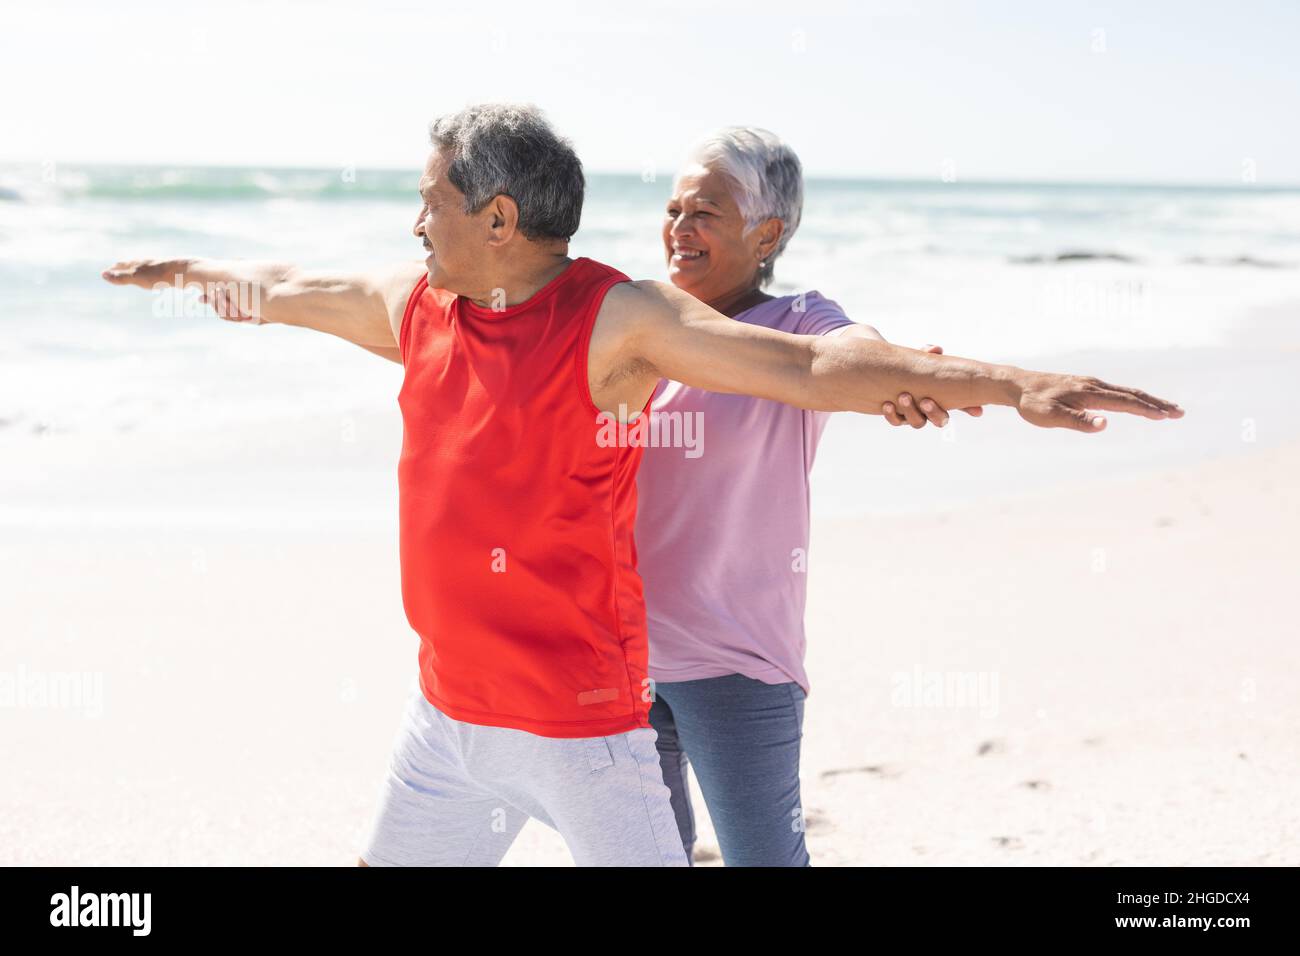 Smiling senior biracial woman helping man with arms outstretched yoga posture at sunny beach Stock Photo